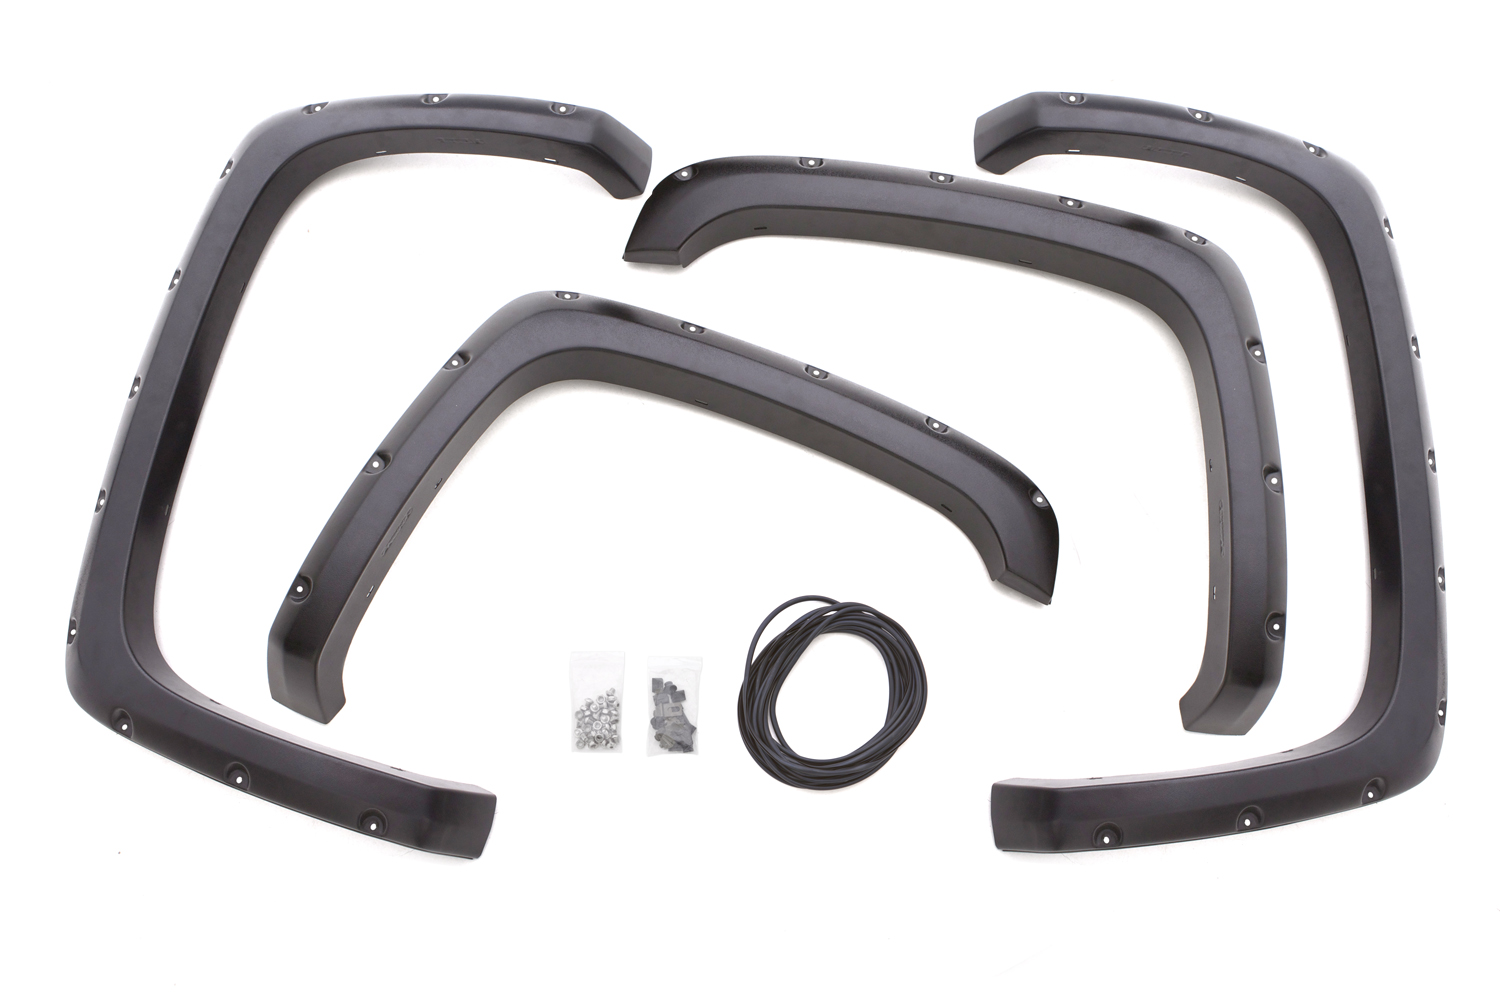 Rivet Style Fender Flare Set - Front and Rear, Smooth, 4-Piece Set - RX130S